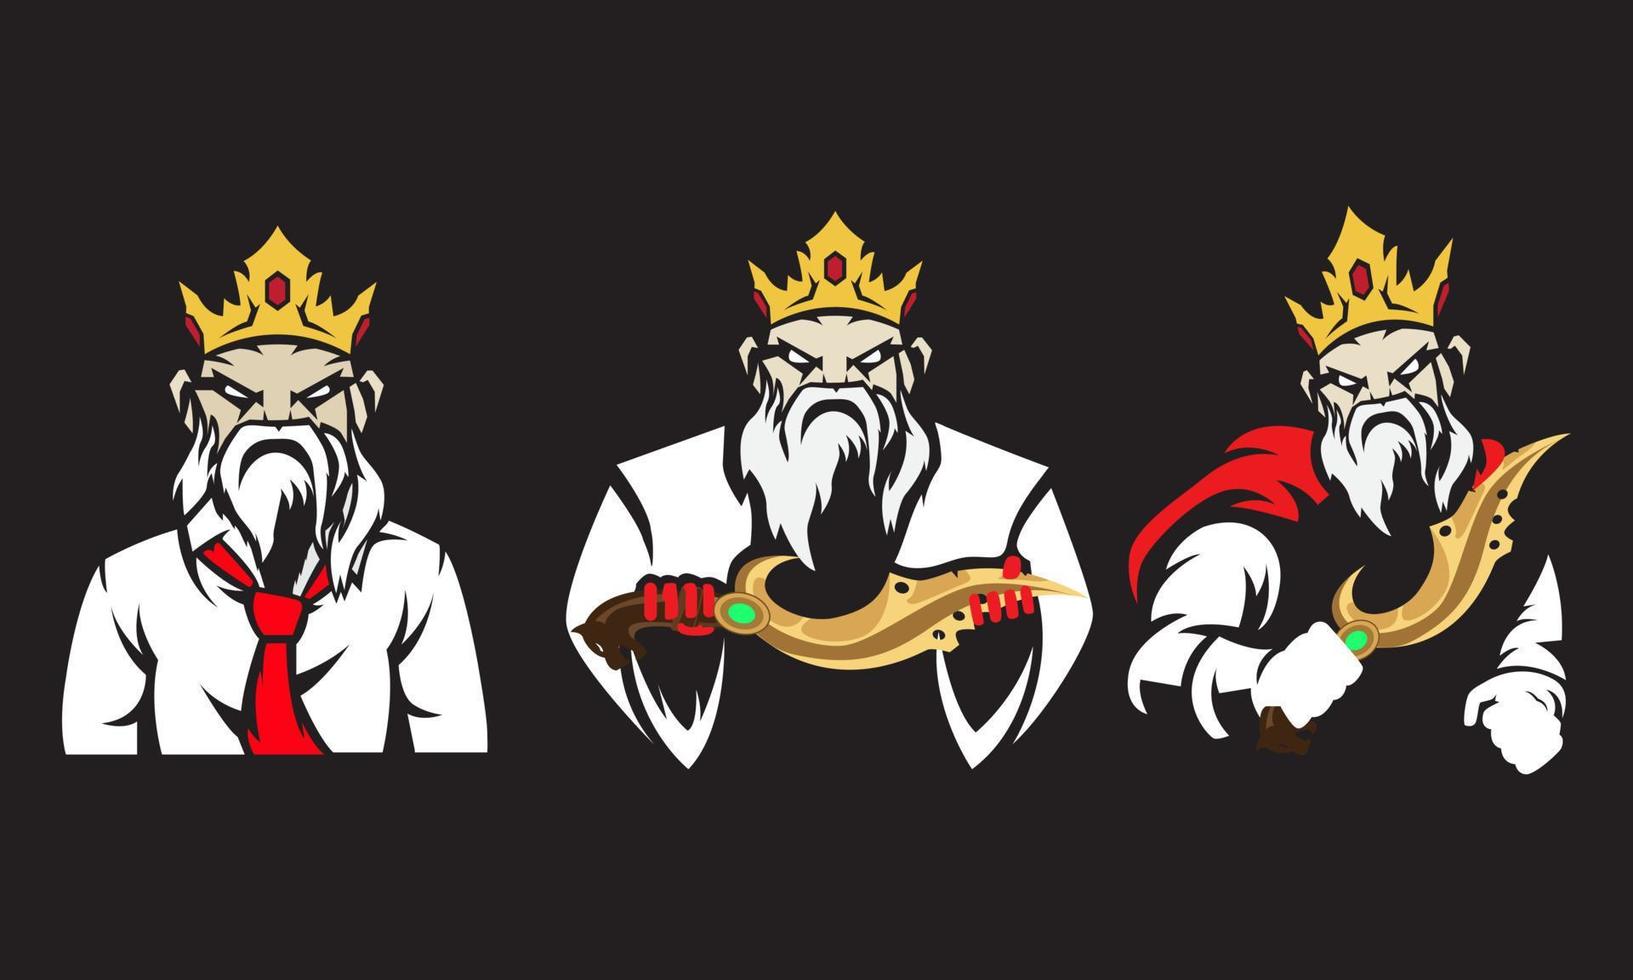 The old king character in various costumes uses a Kujang weapon. Vector illustration